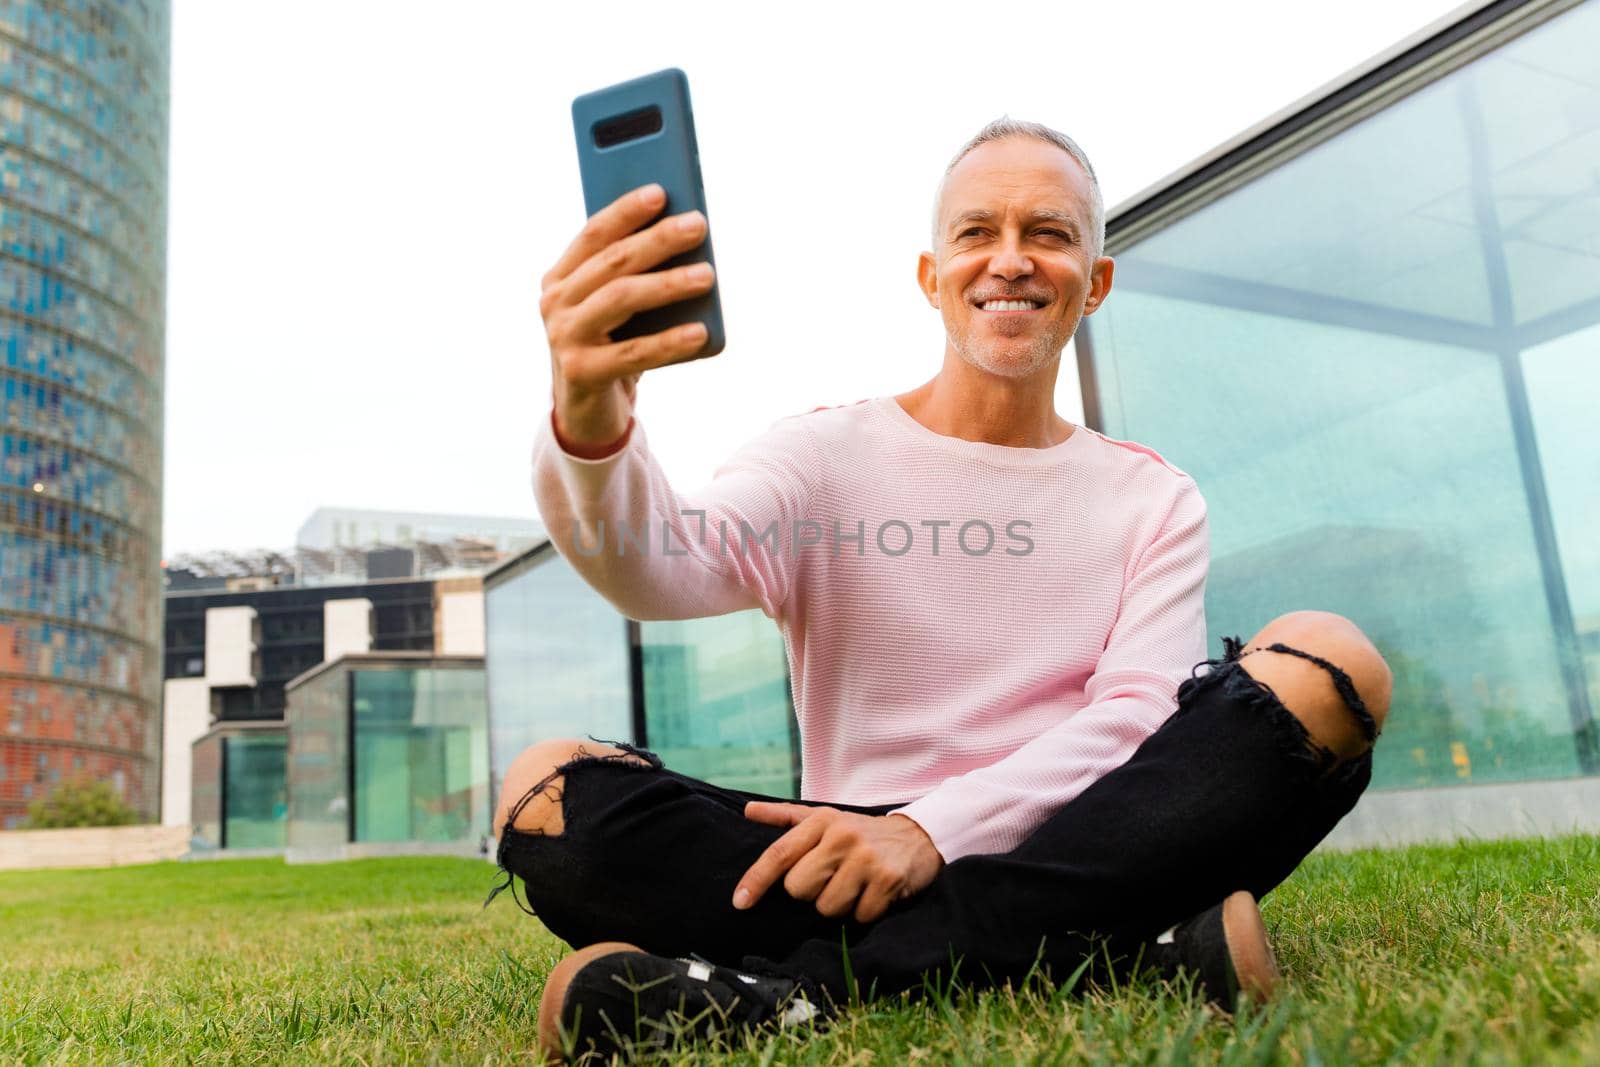 Caucasian man taking selfie using mobile phone sitting on the grass in city park. Technology concept.